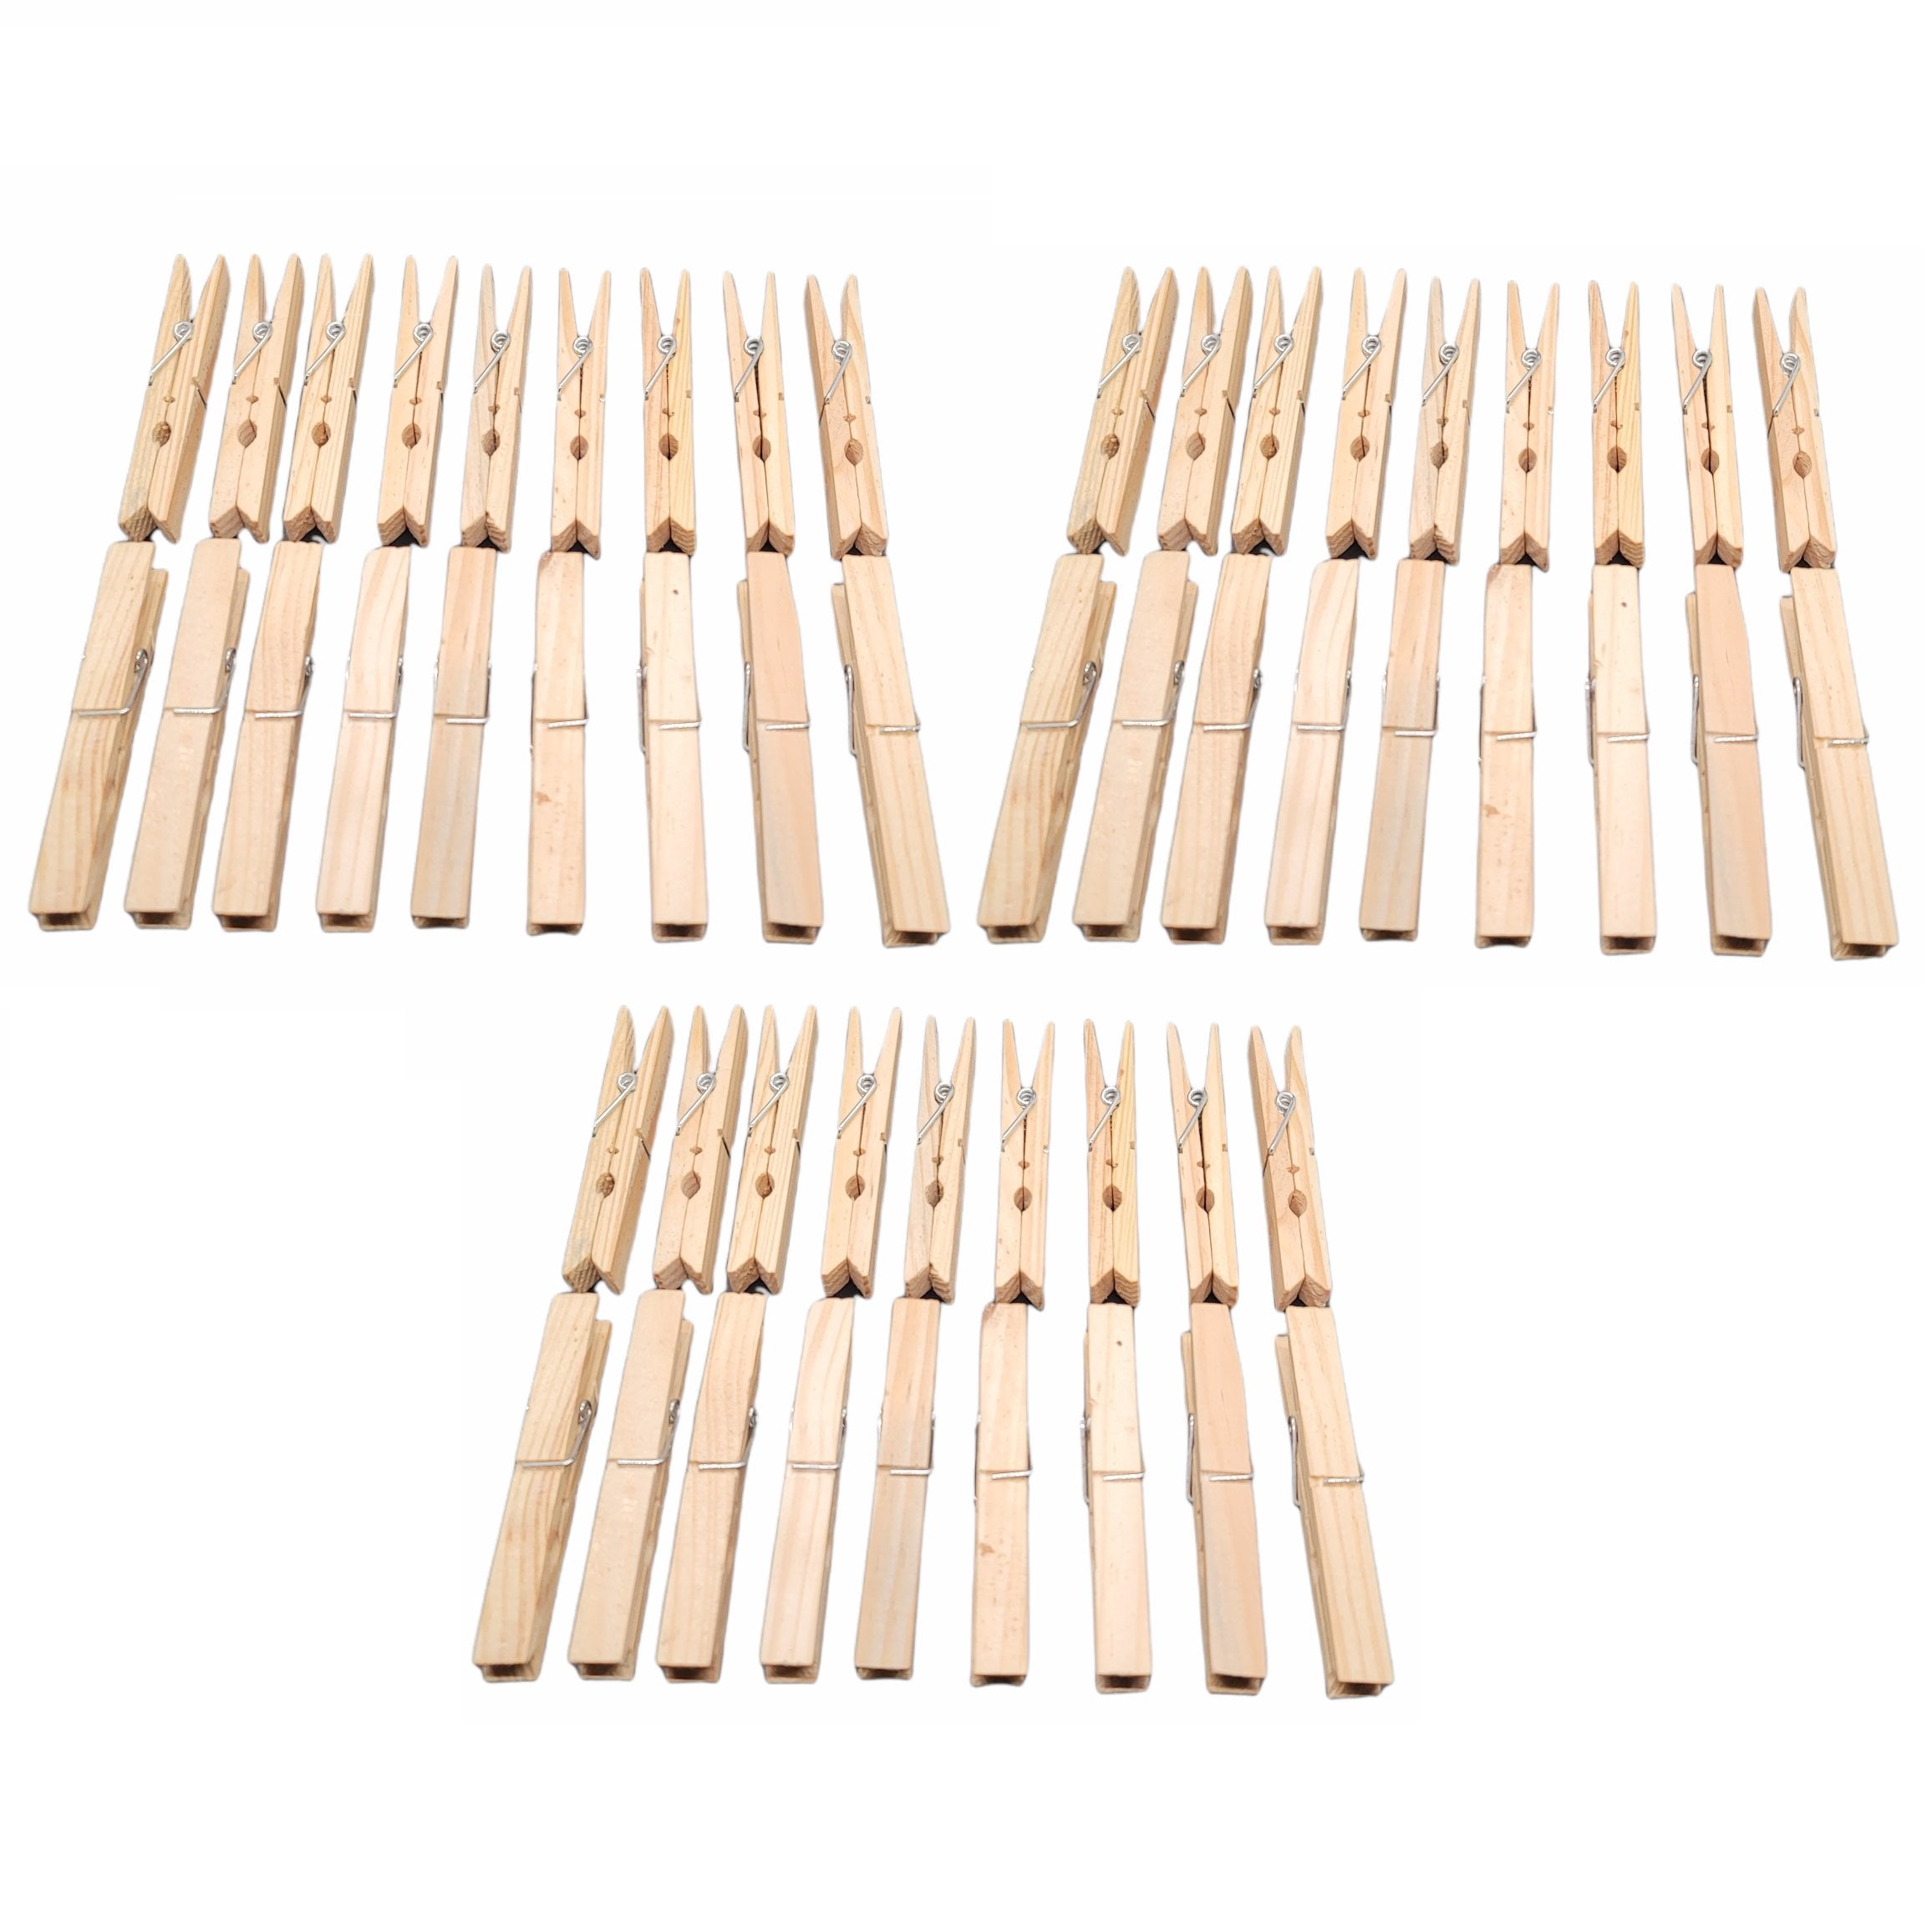 Set of Heavy-Duty Wooden Clothespins